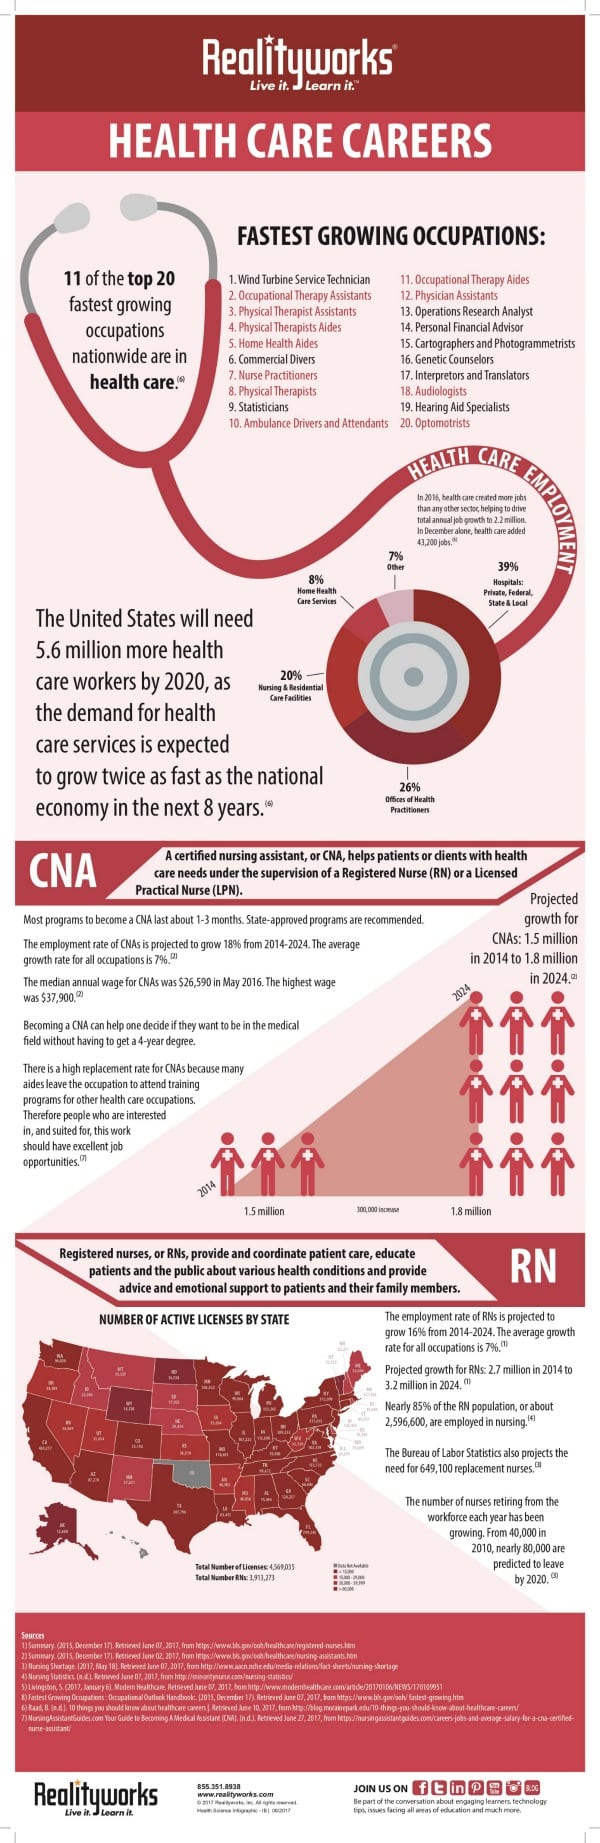 Health care careers infographic